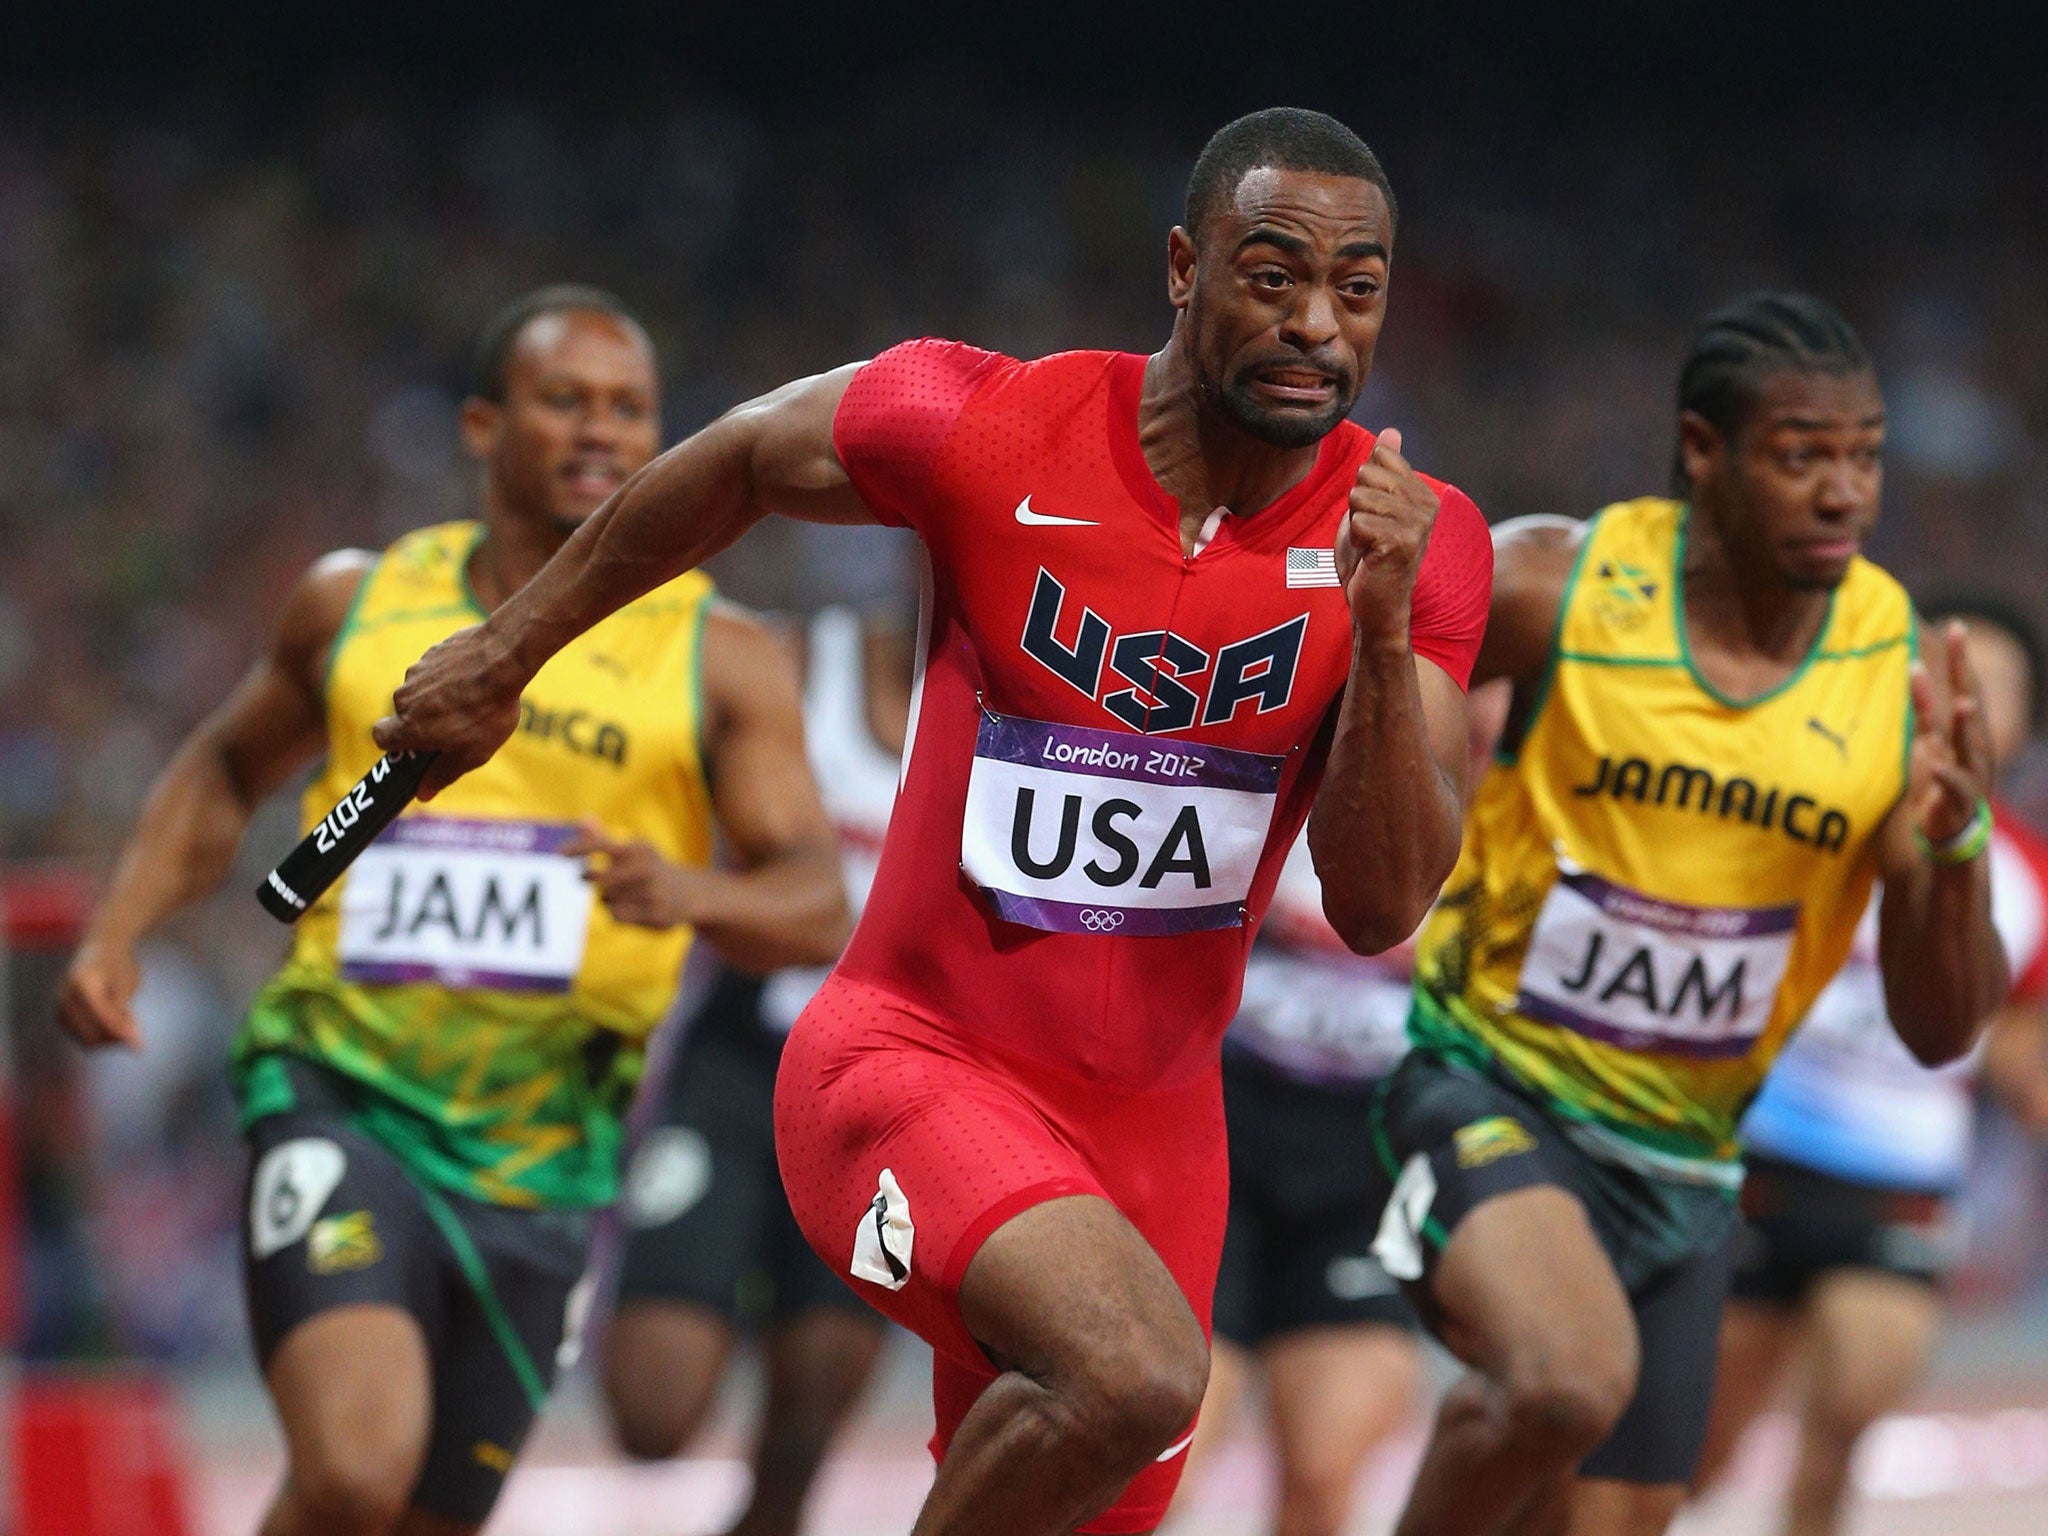 American Tyson Gay received a one-year reduced ban for testing positive to steroids